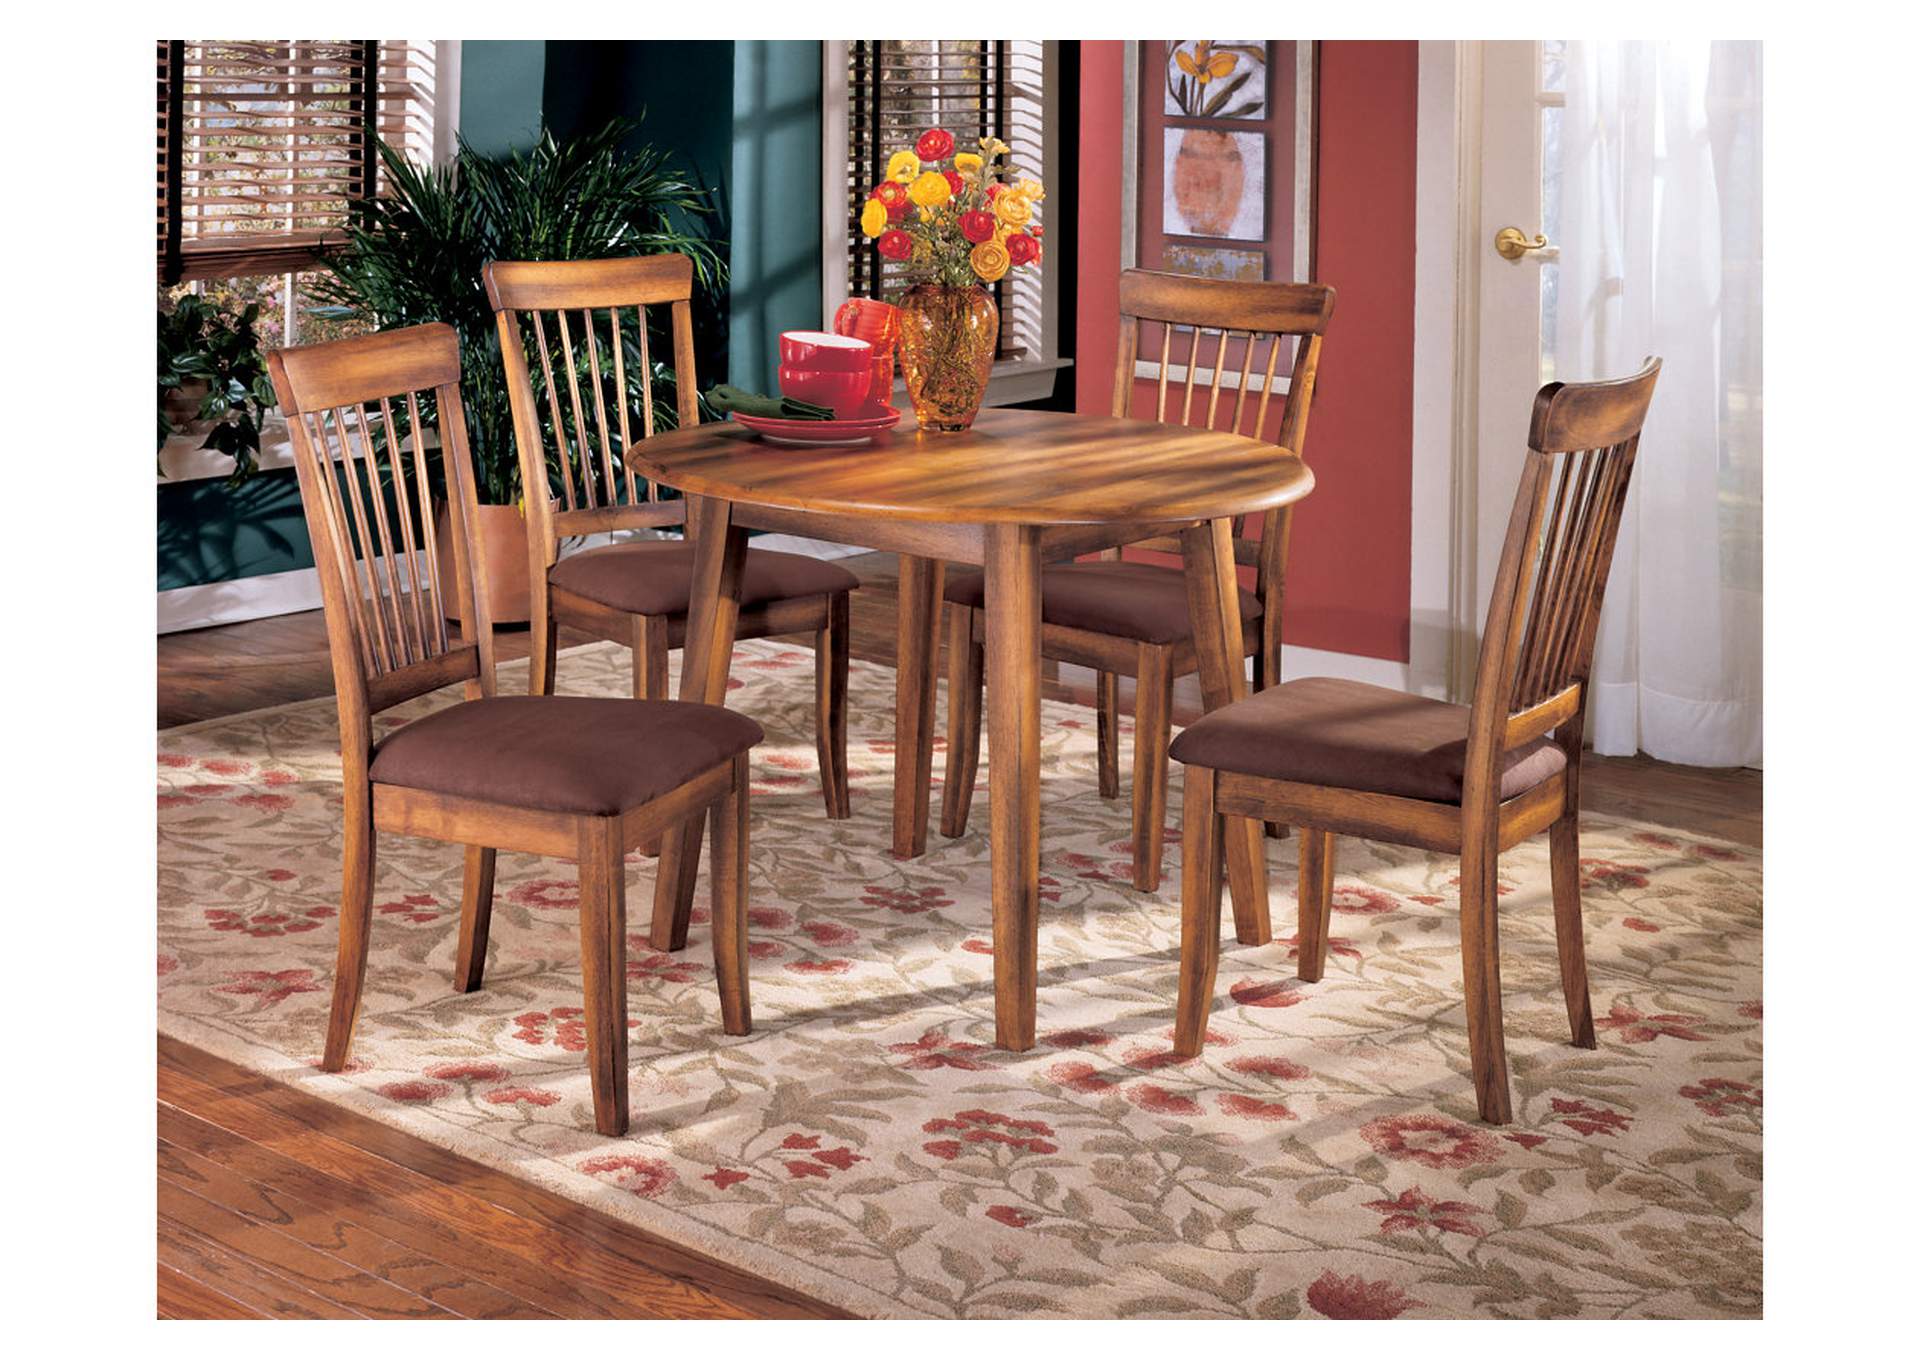 Berringer Dining Table and 4 Chairs,Ashley